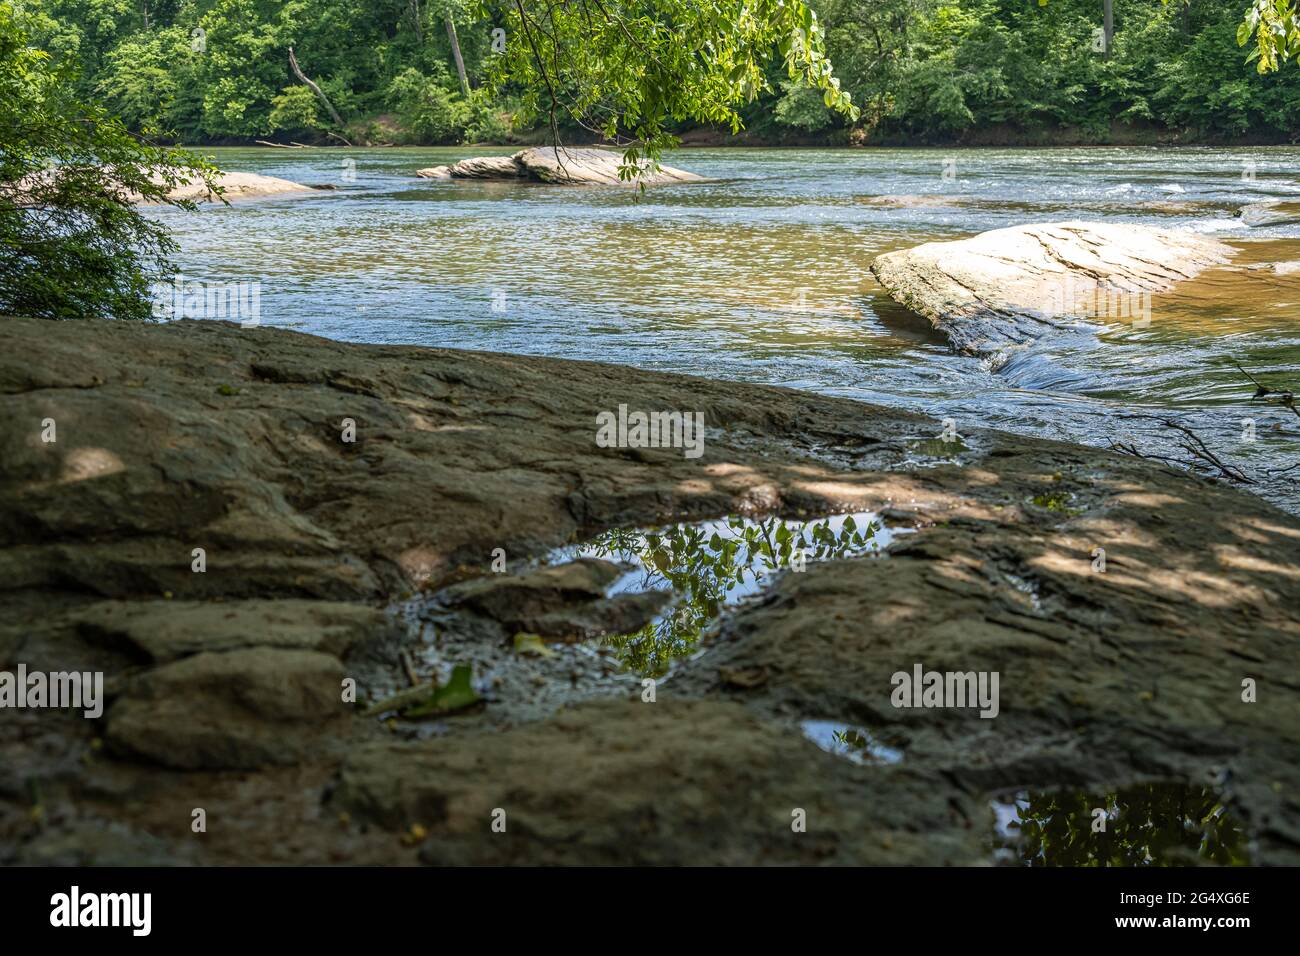 Beautiful Chattahoochee River at Island Ford Park in the Chattahoochee River National Recreation Area at Sandy Springs, across from Roswell, Georgia. Stock Photo